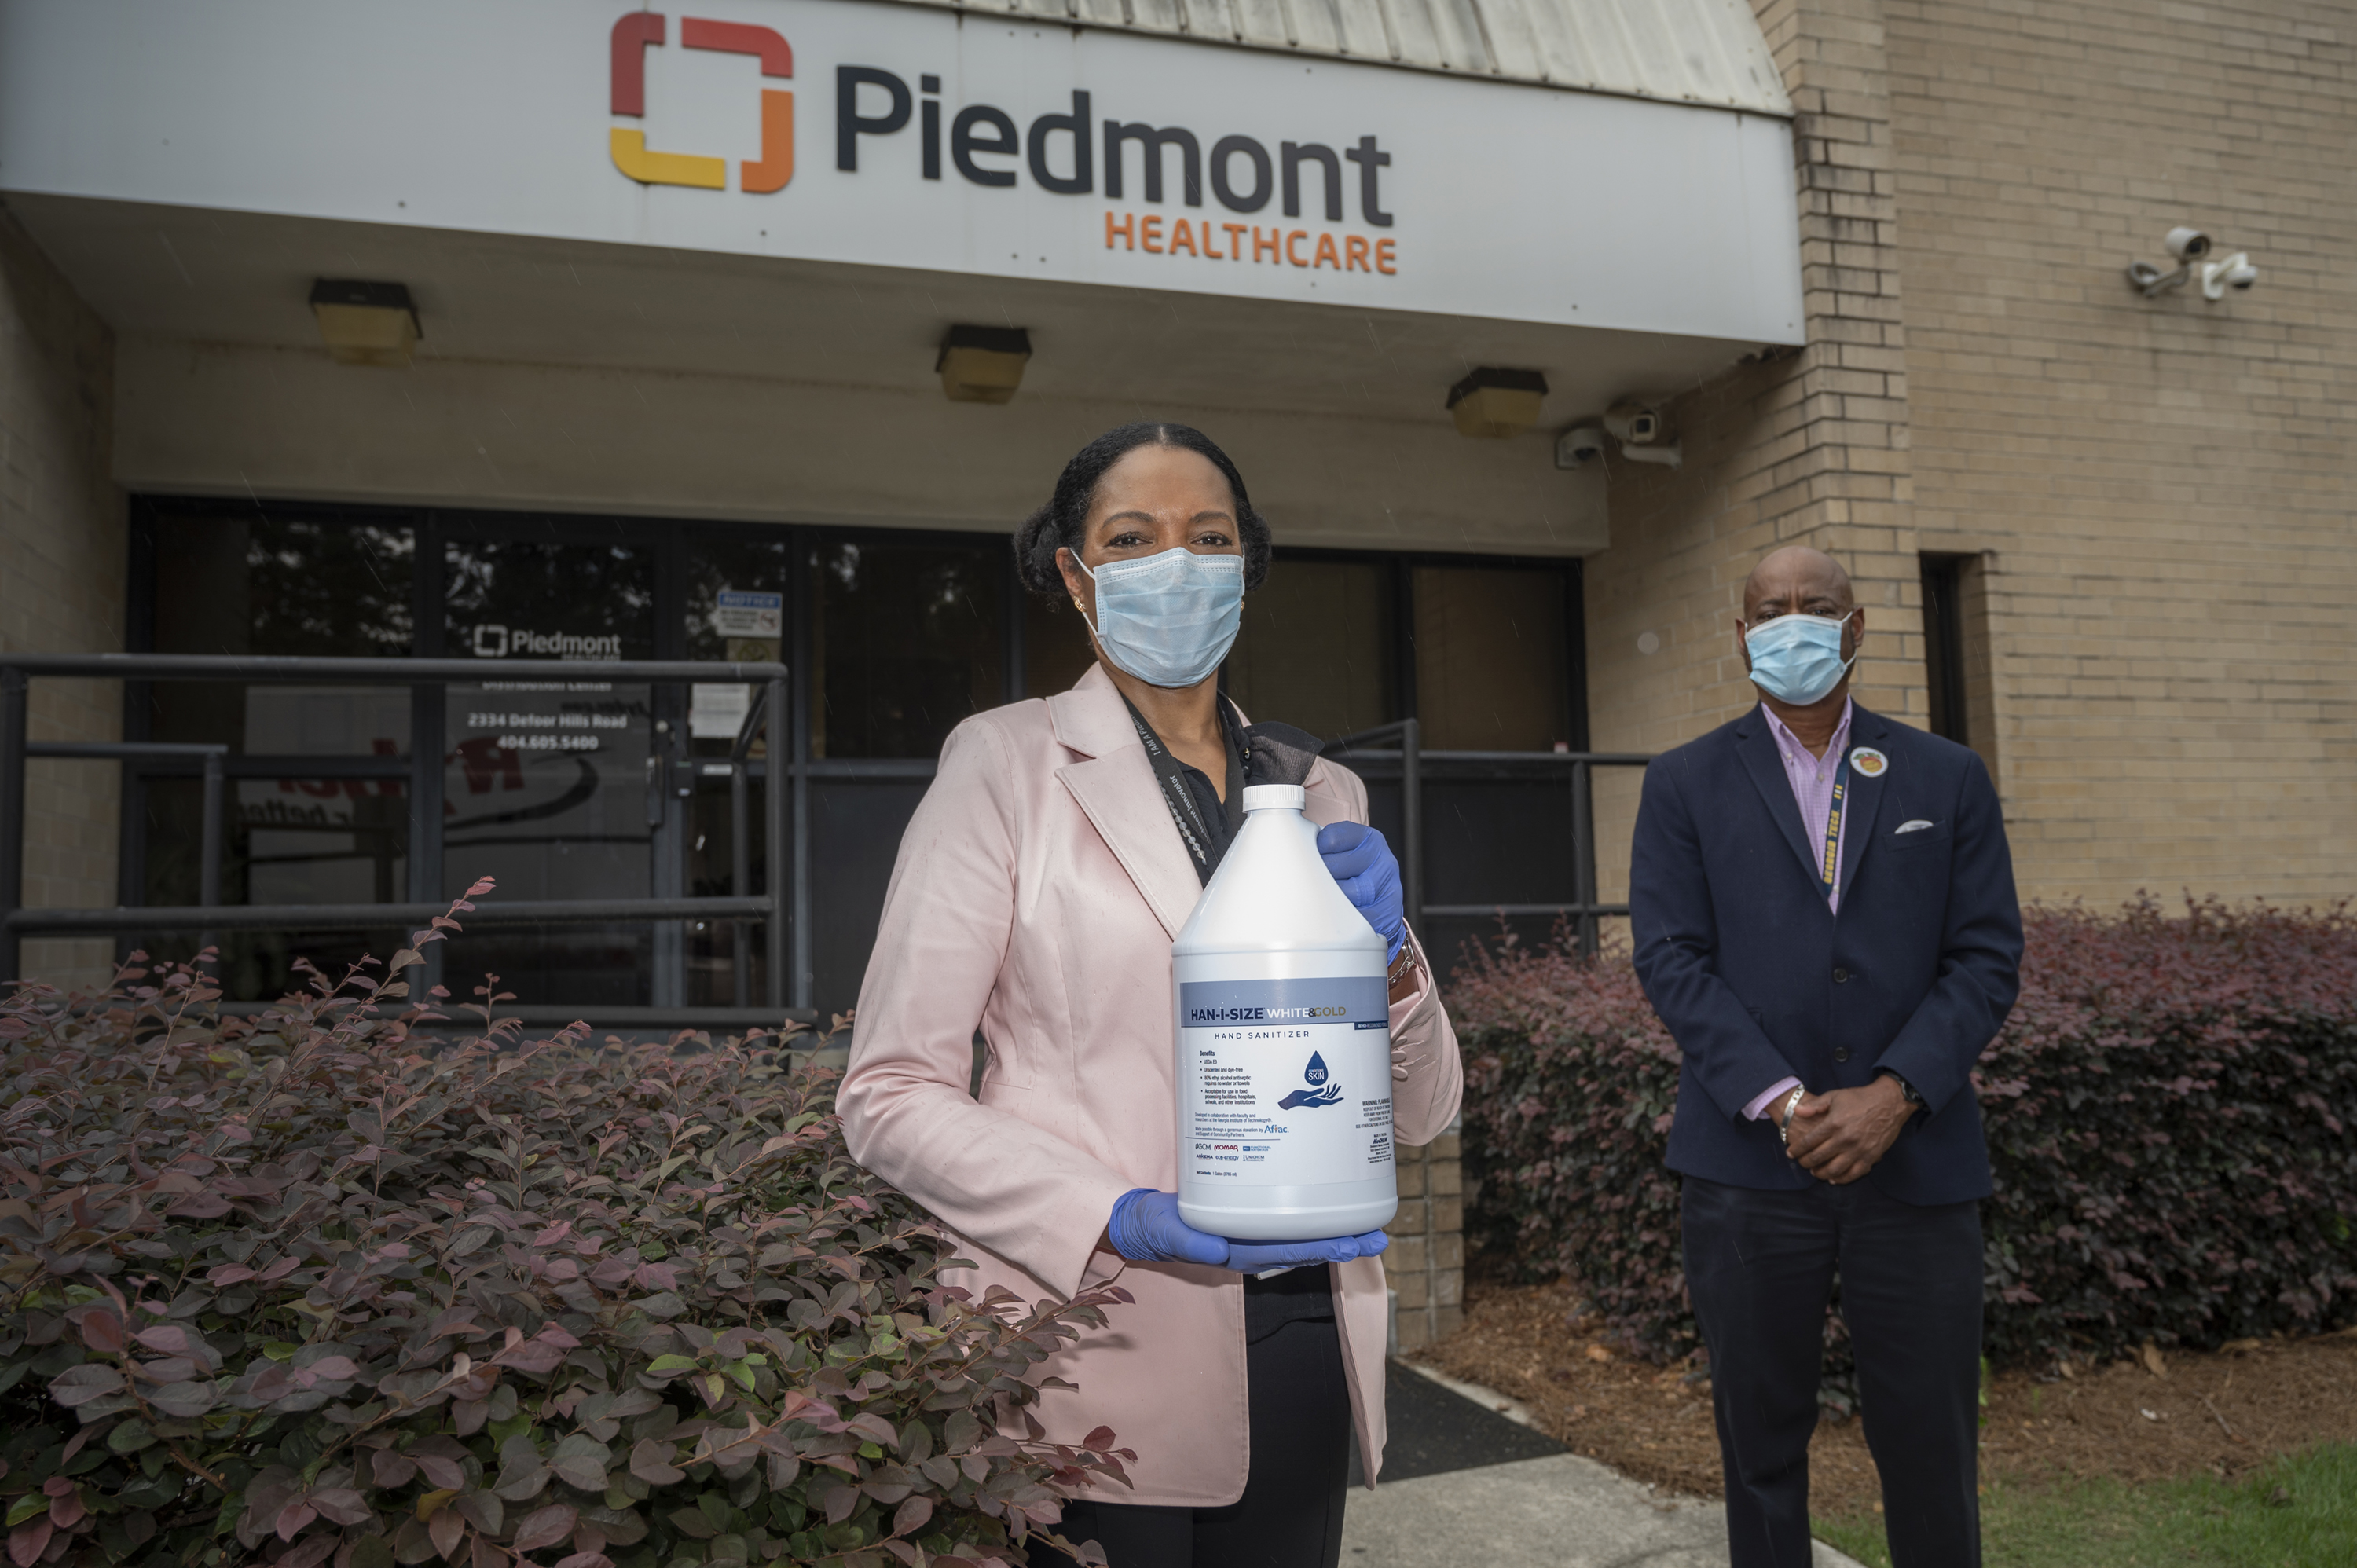 Dr. Jayne Morgan welcomes the first delivery of the newly designed, ethanol-based hand sanitizer to Piedmont Healthcare of Atlanta. Behind her, George White of Georgia Tech, a team member in the hand sanitizer initiative. Georgia Tech / Christopher Moore